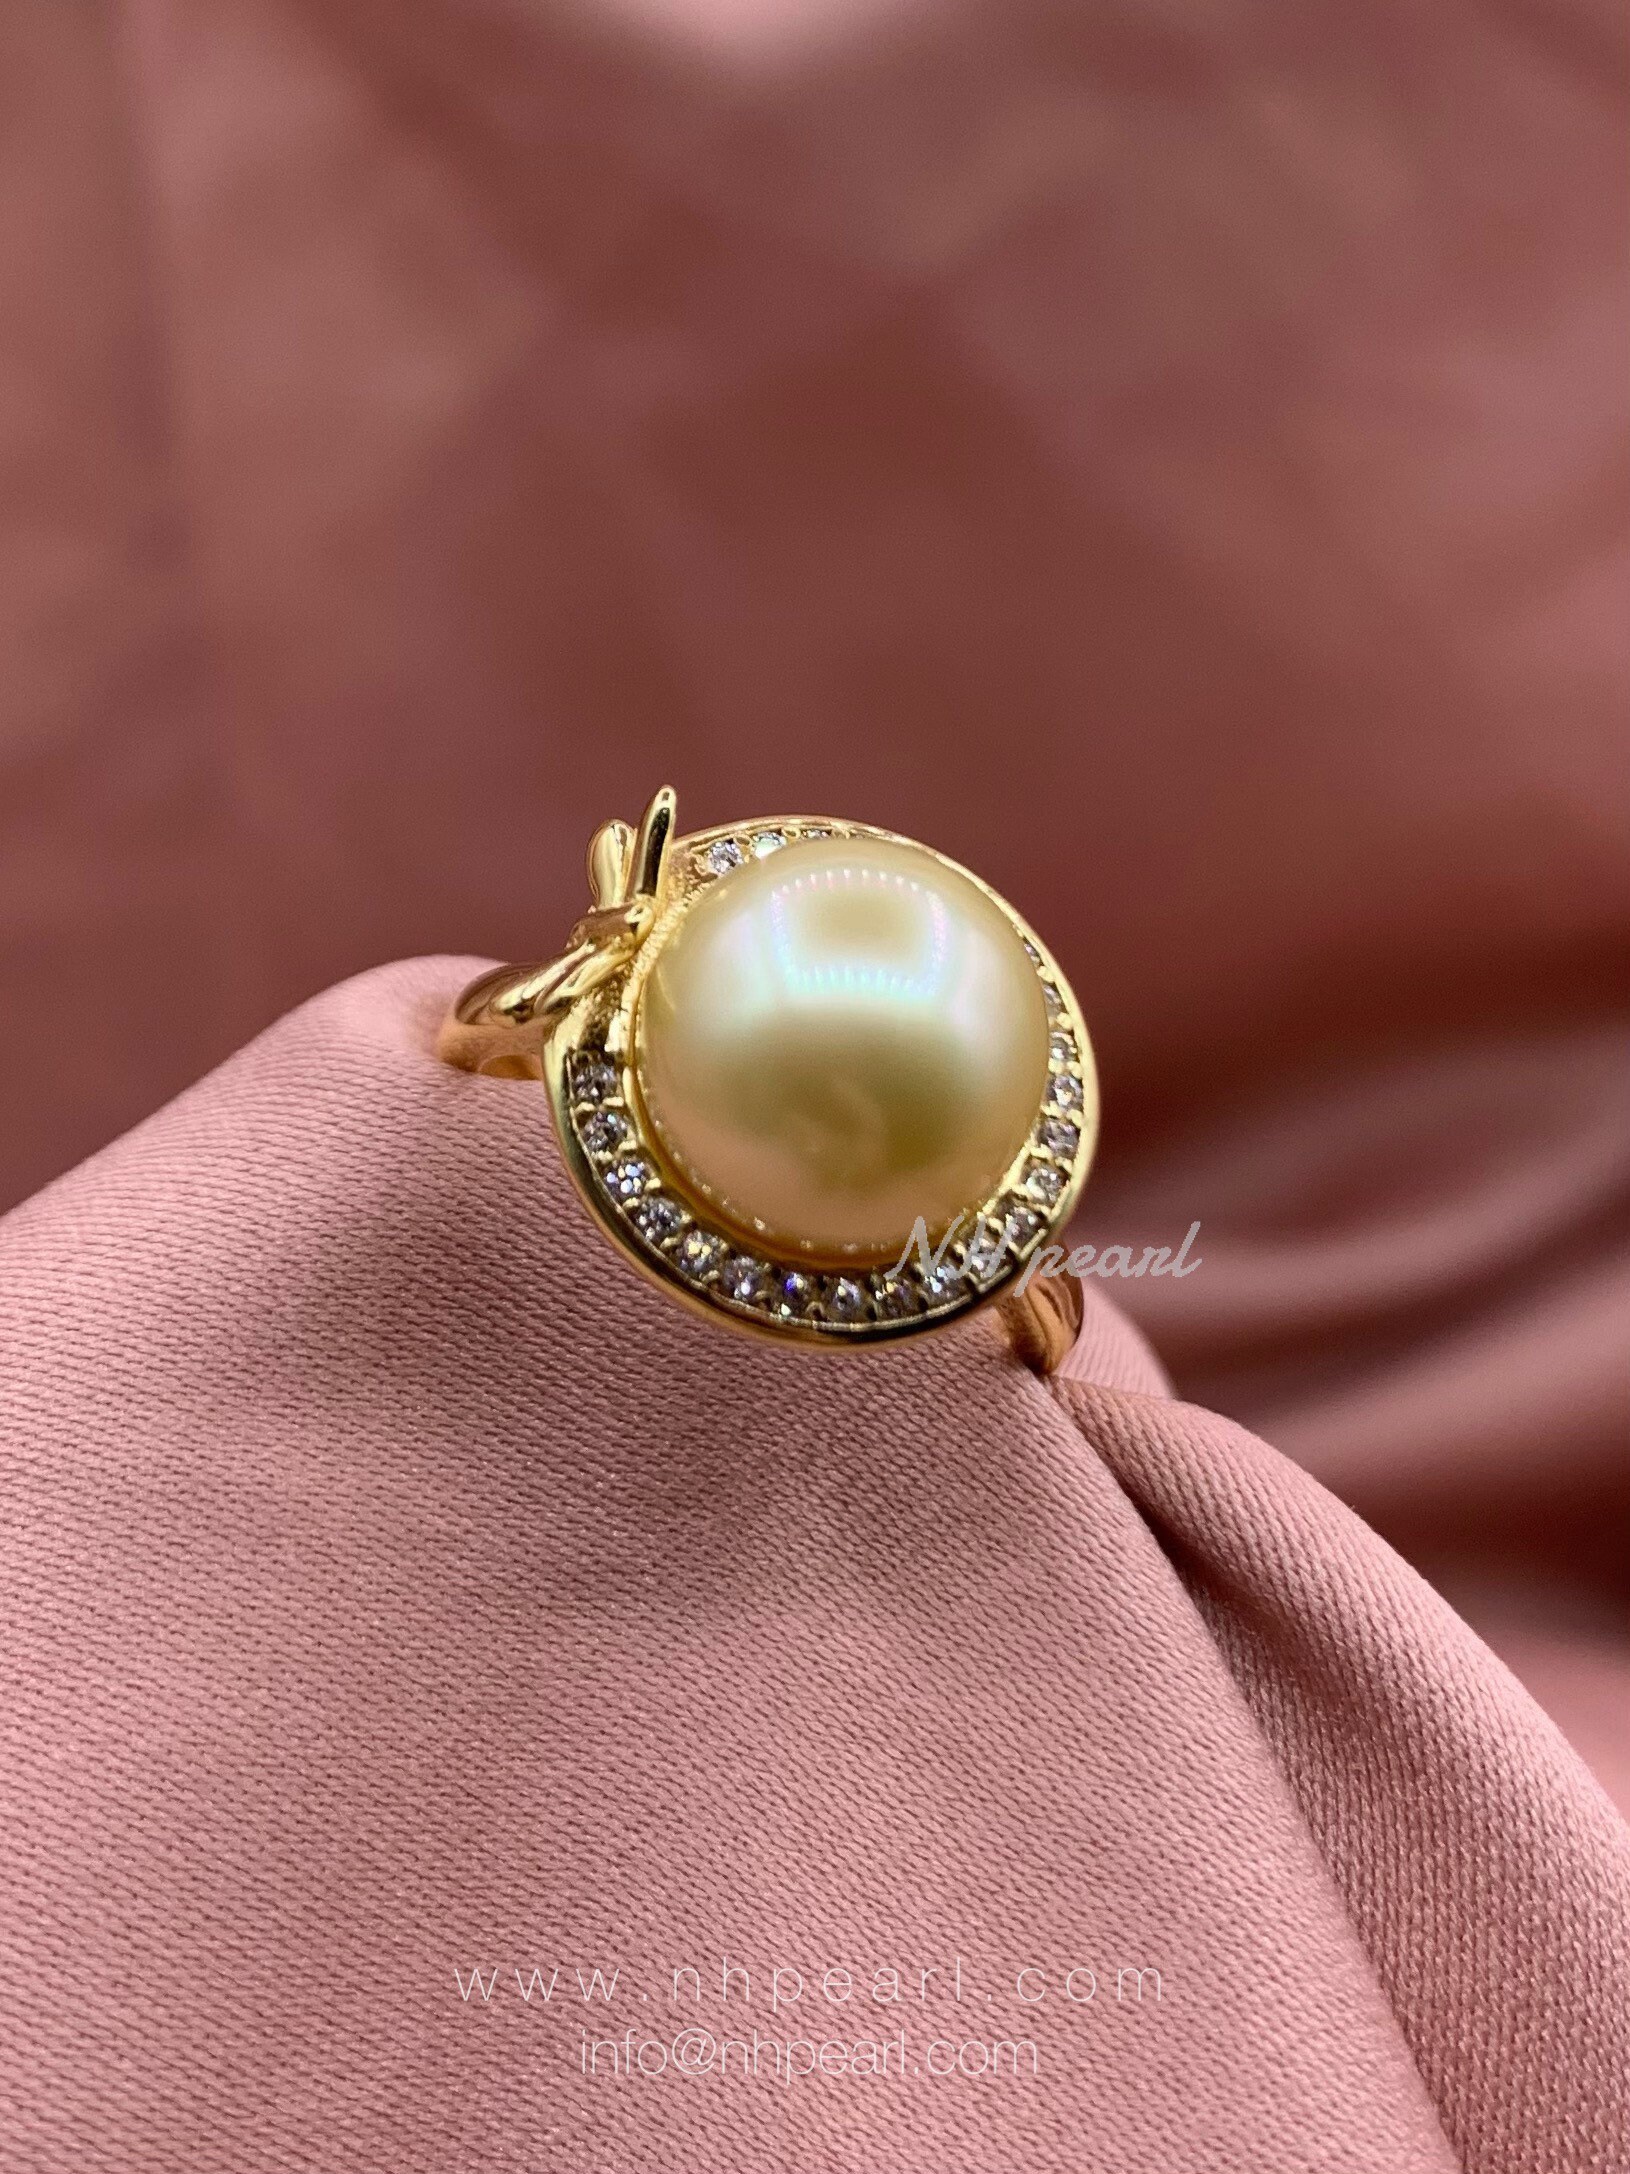 Round Golden South Sea Pearl With Elegant S925 Sterling Silver